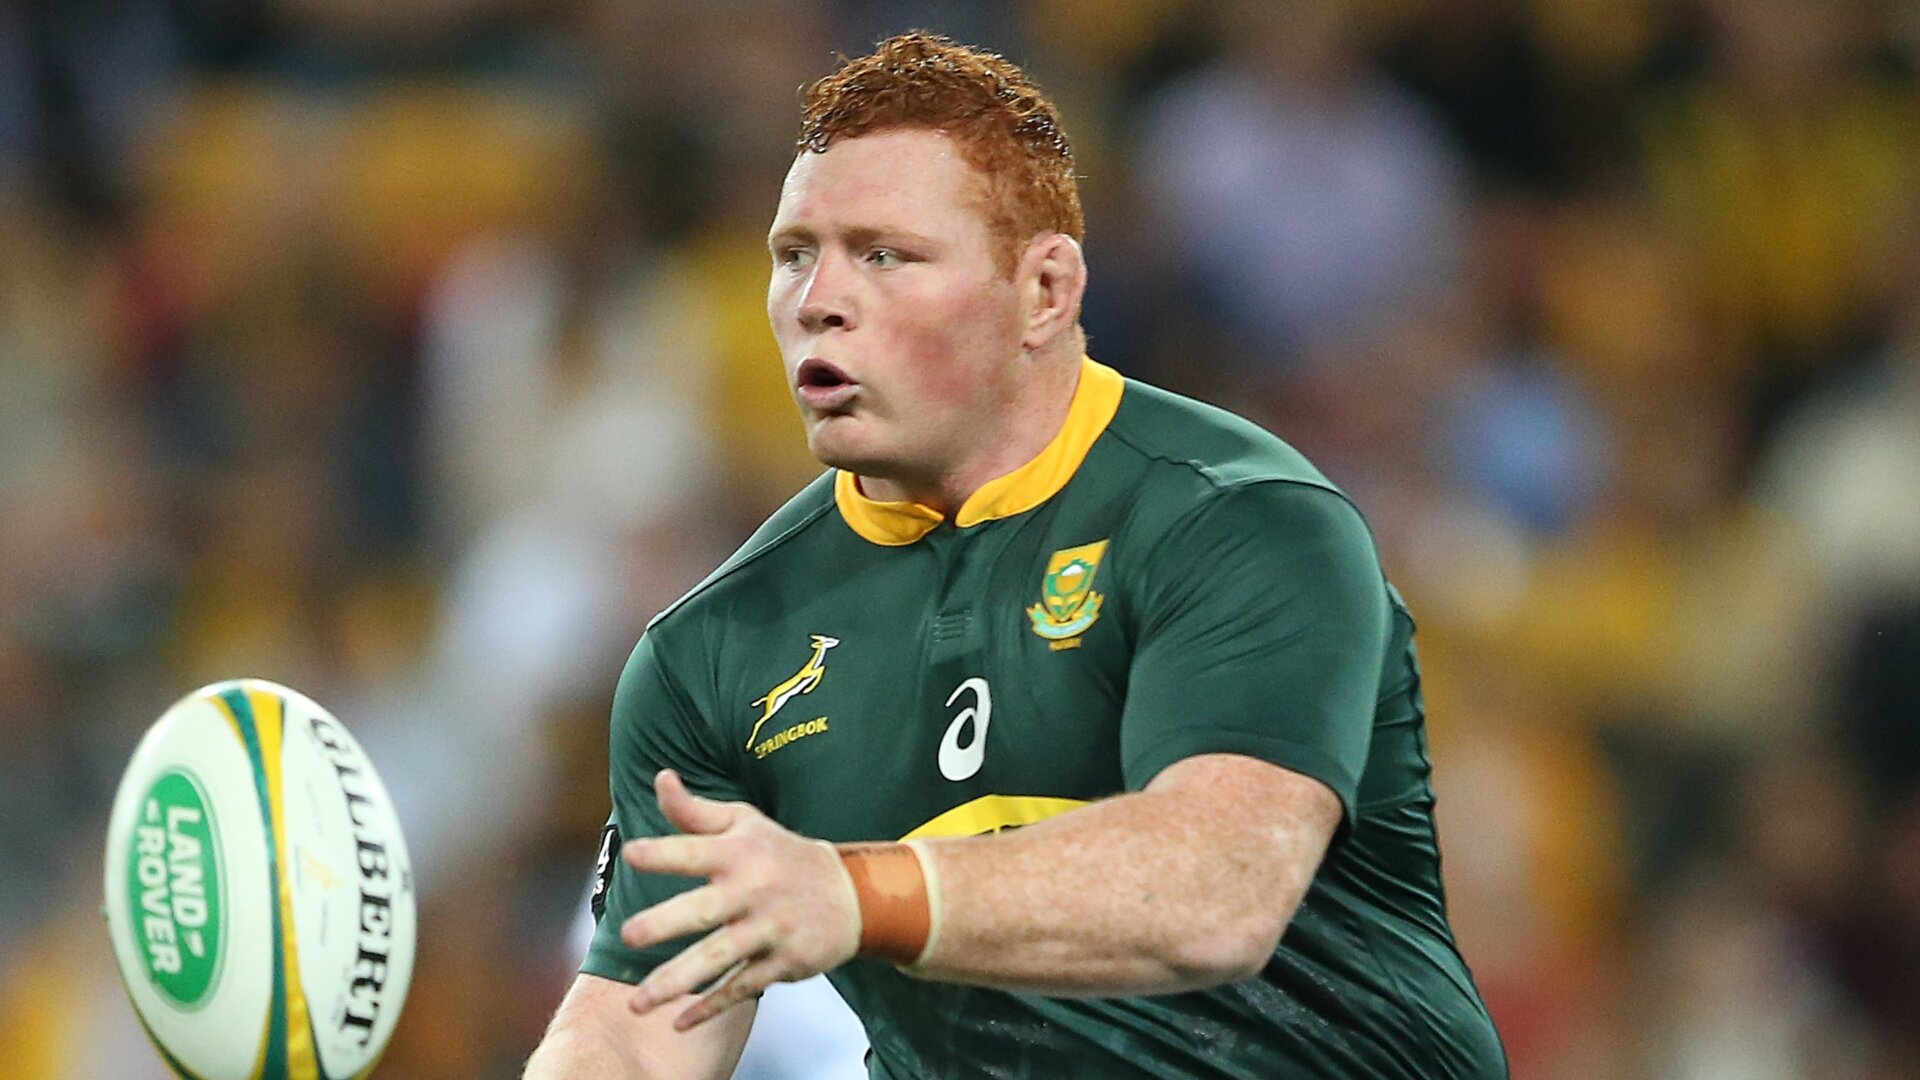 "It is Going to be a Challenging Match," said the 31-year-old Loosehead